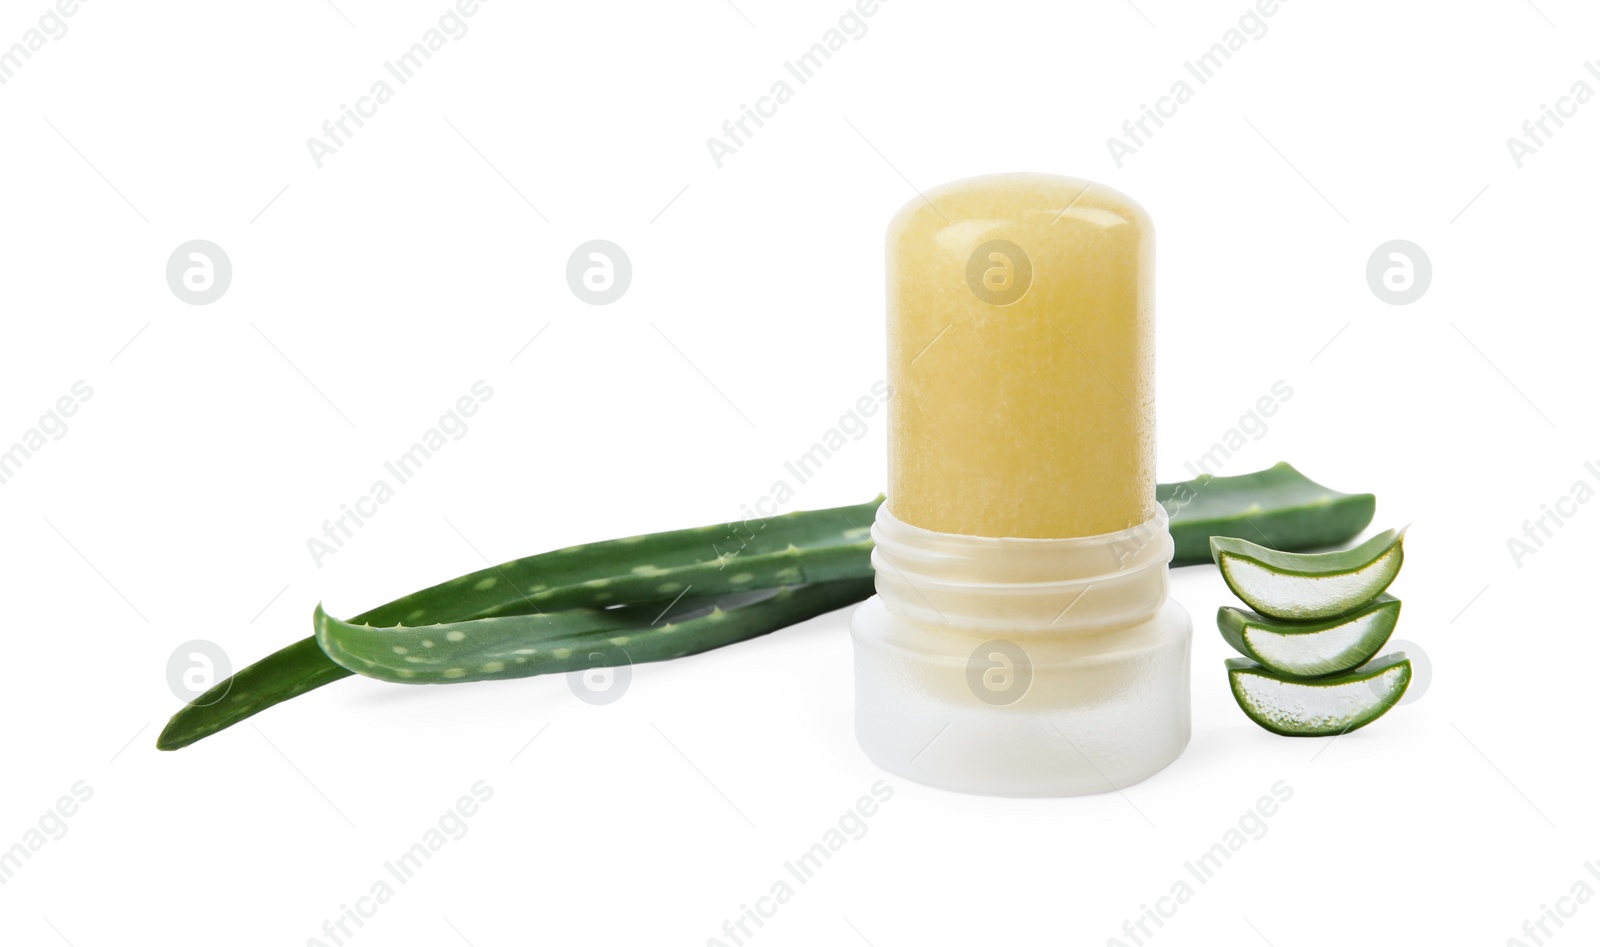 Photo of Natural crystal alum deodorant and fresh aloe on white background